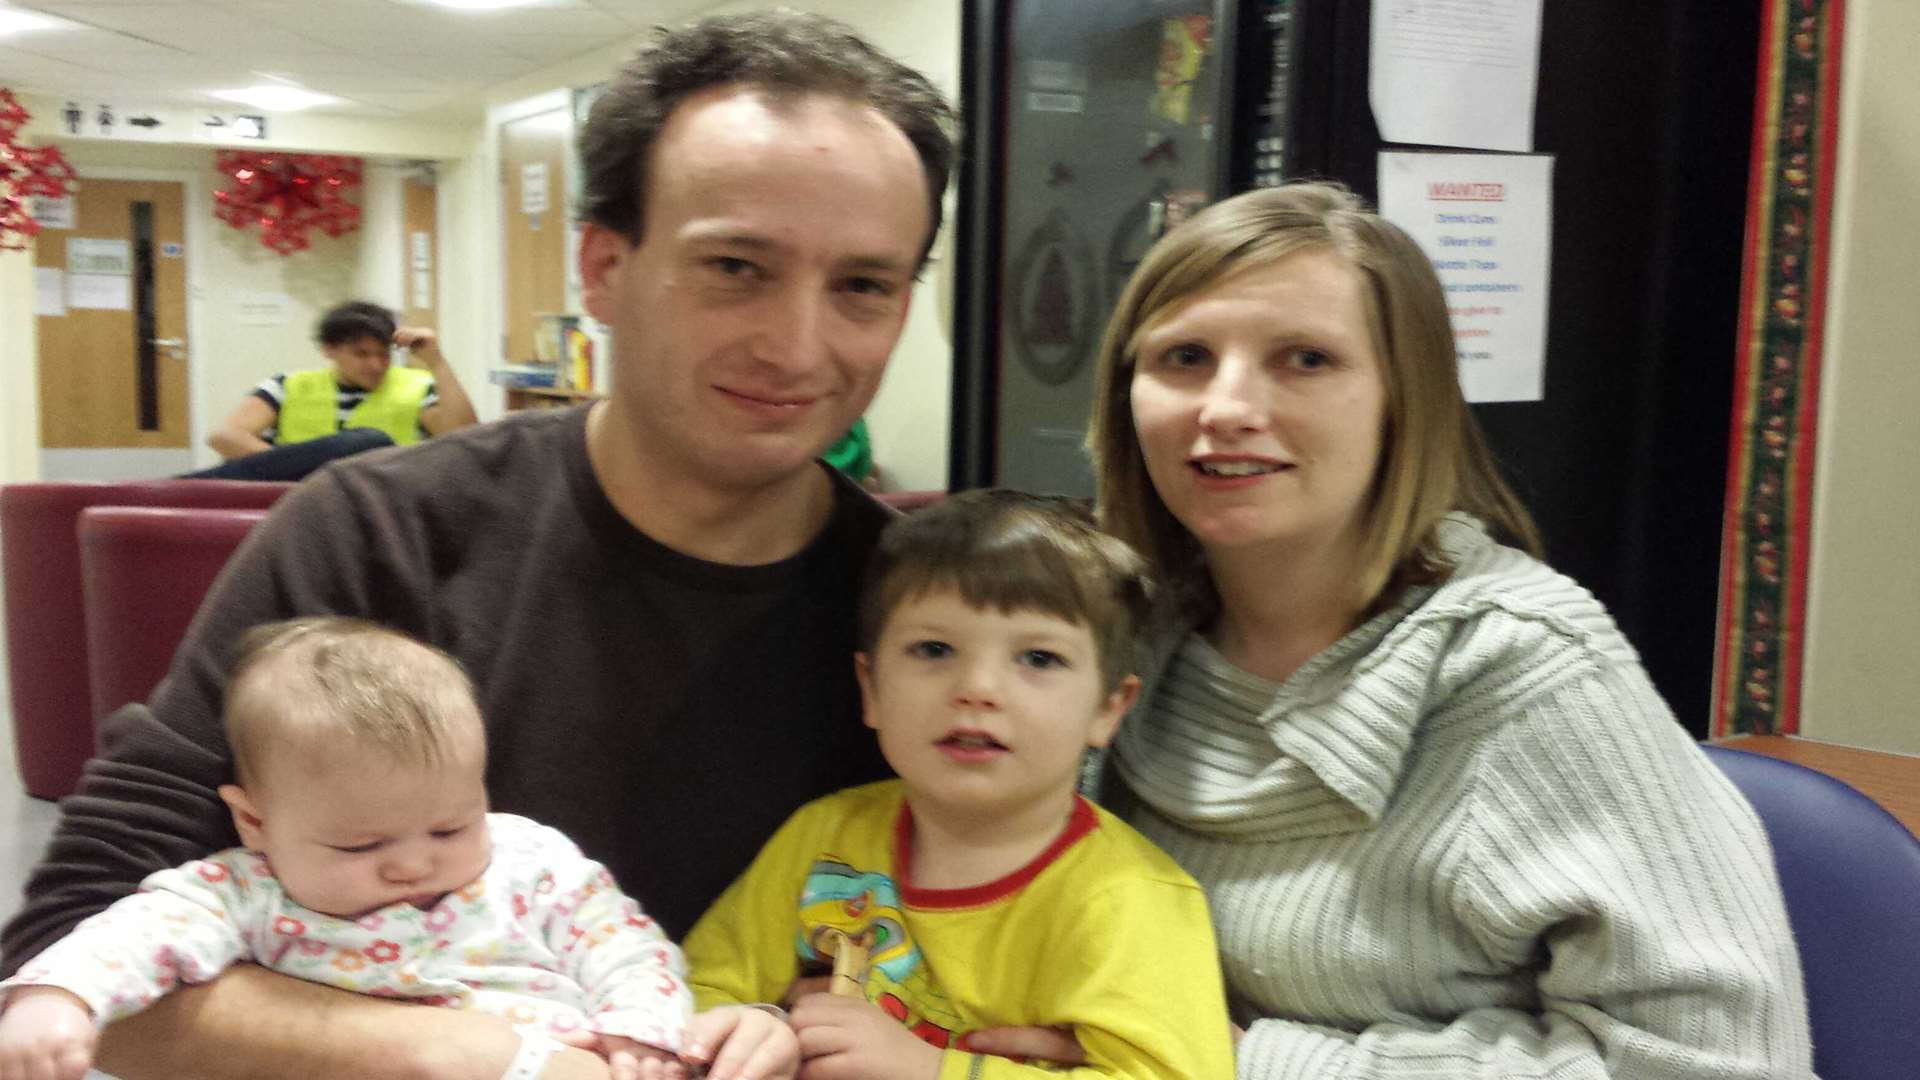 Guy and Julie Widdowson with children Joshua and Isabella at an emergency centre